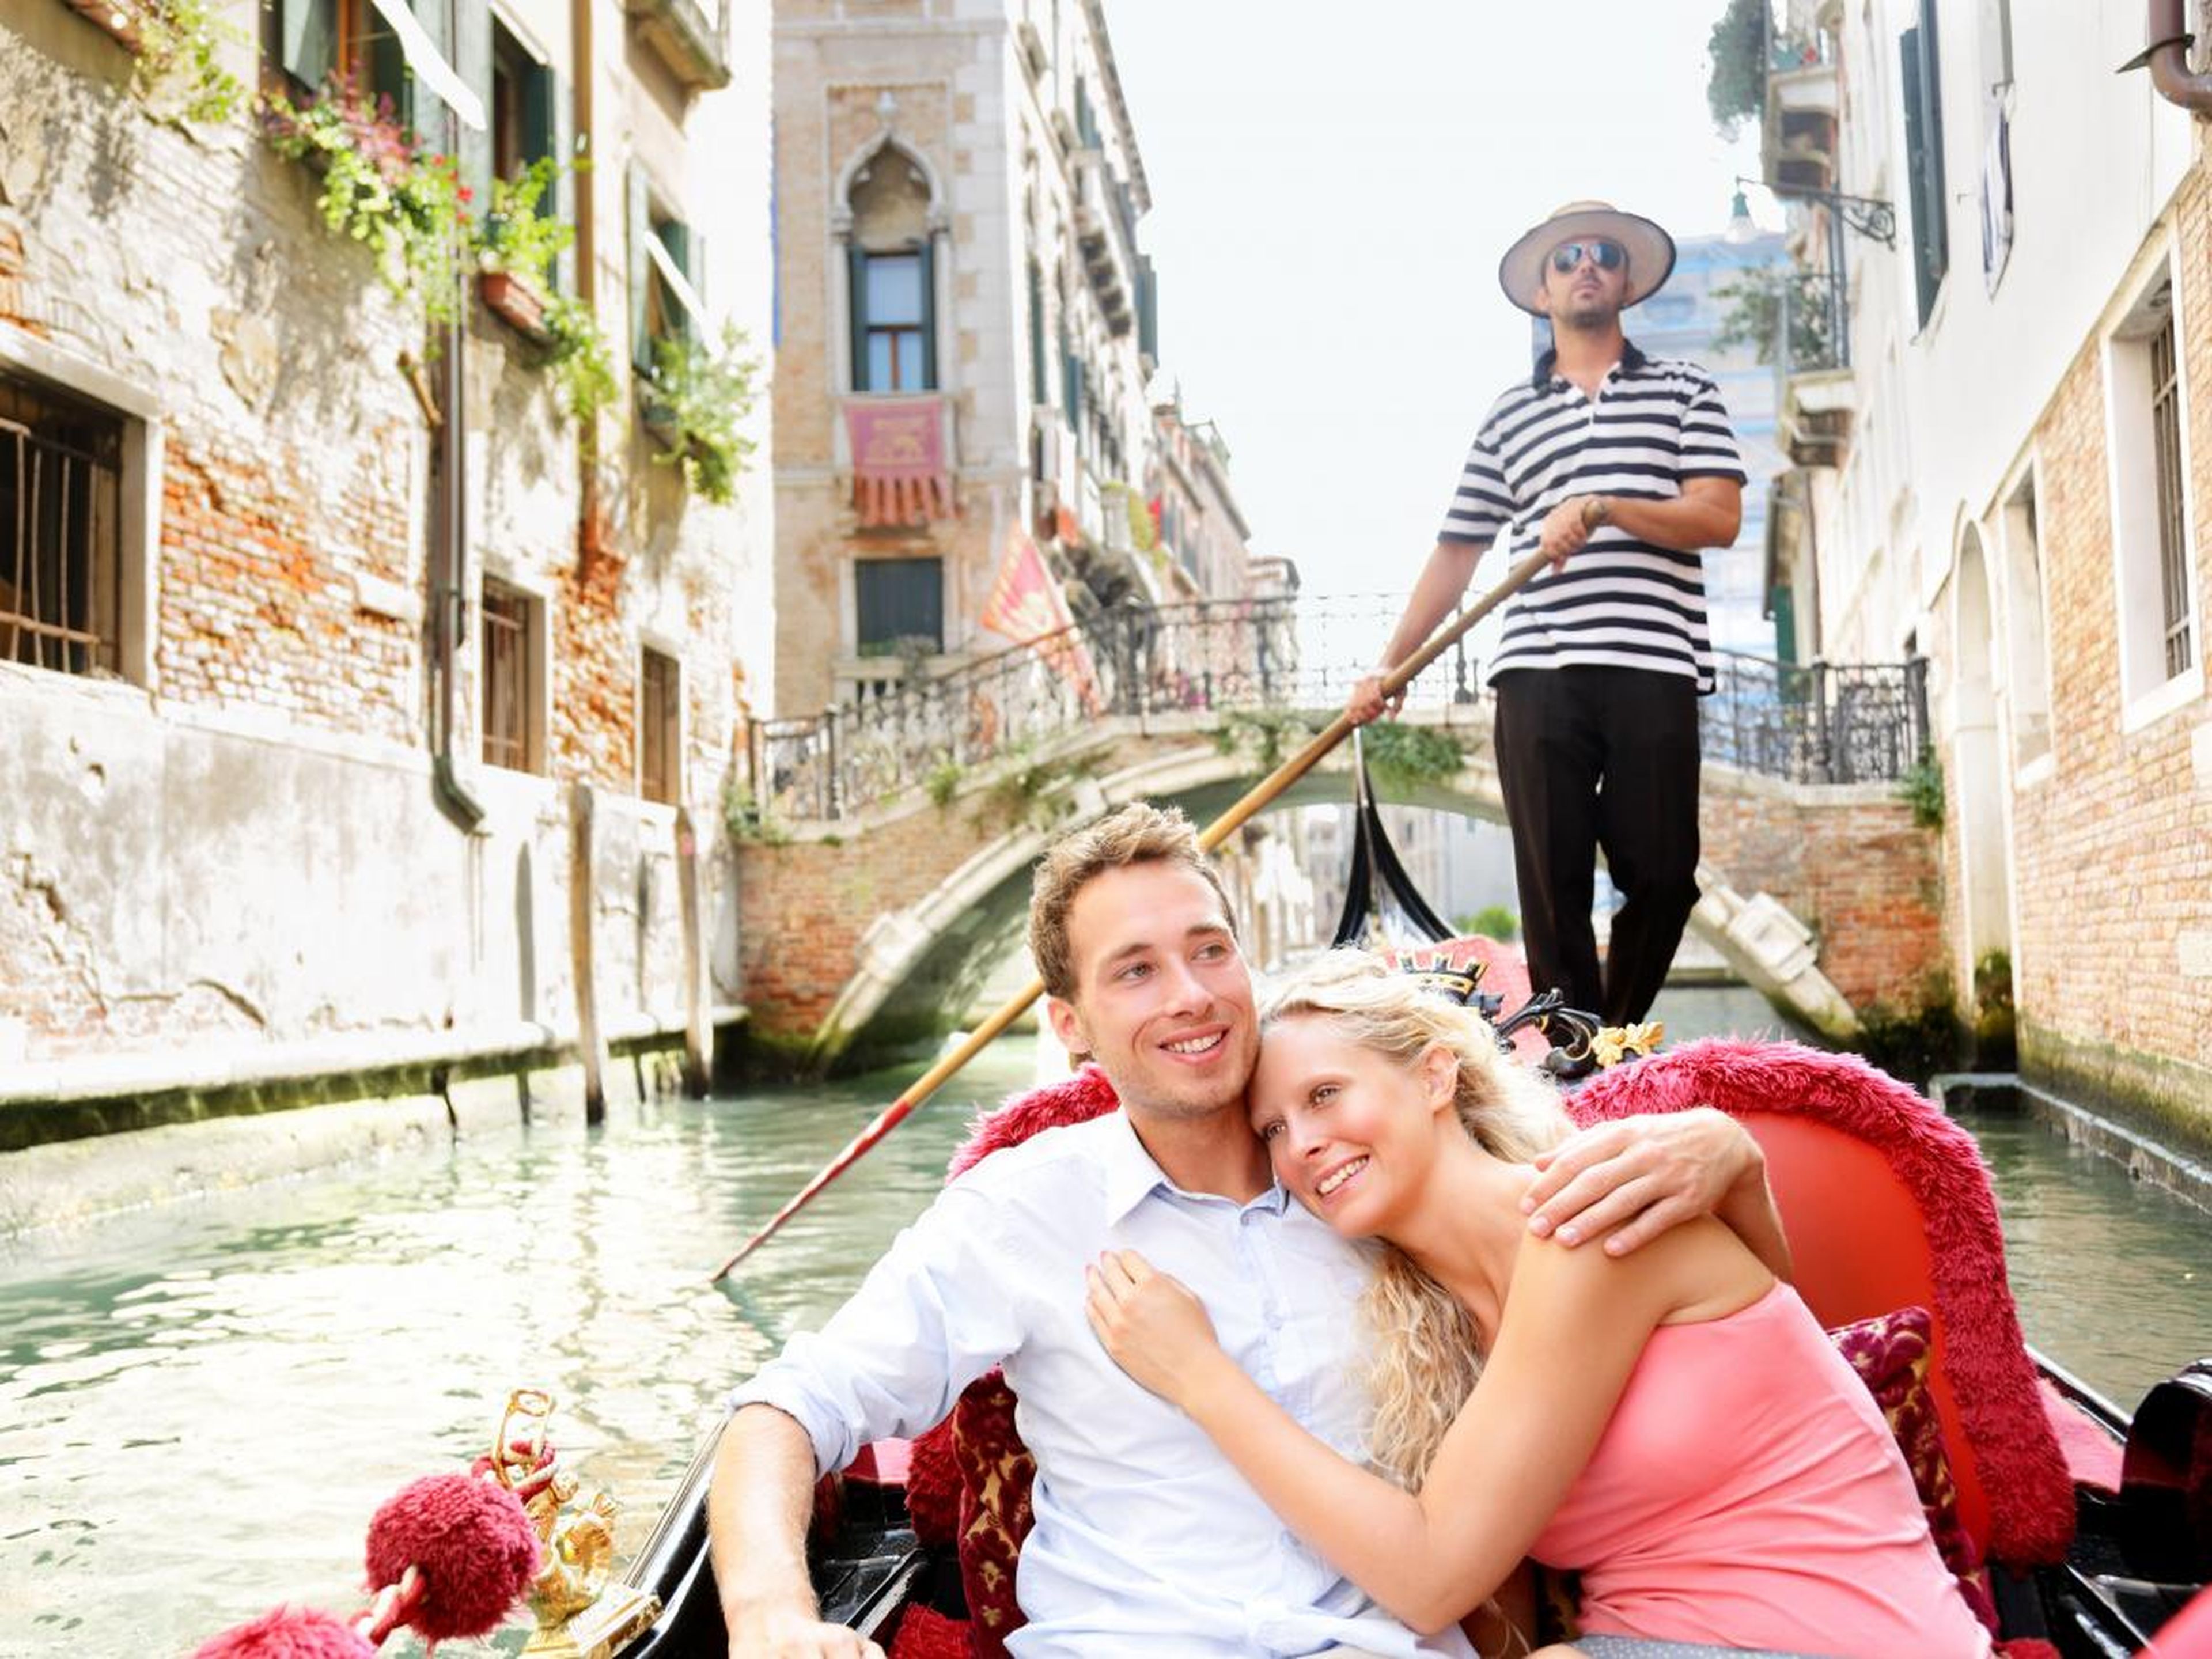 An arguably overrated aspect of Venice is the gondola ride, which is seen as a quintessential romantic experience.